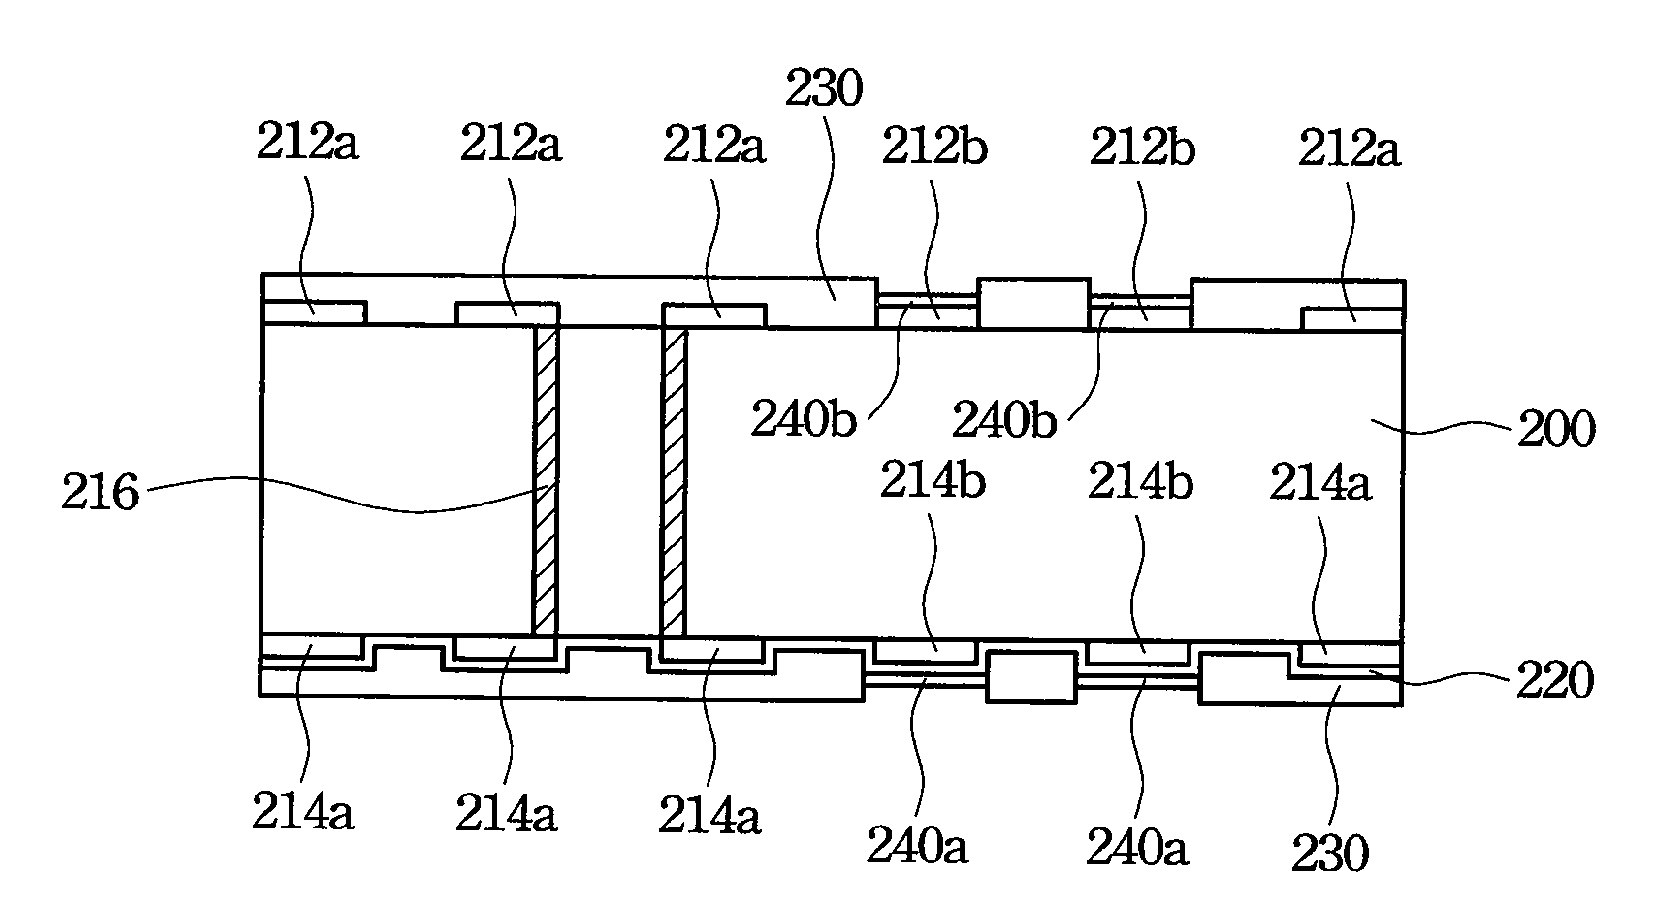 Method of Manufacturing the Substrate for Packaging Integrated Circuits